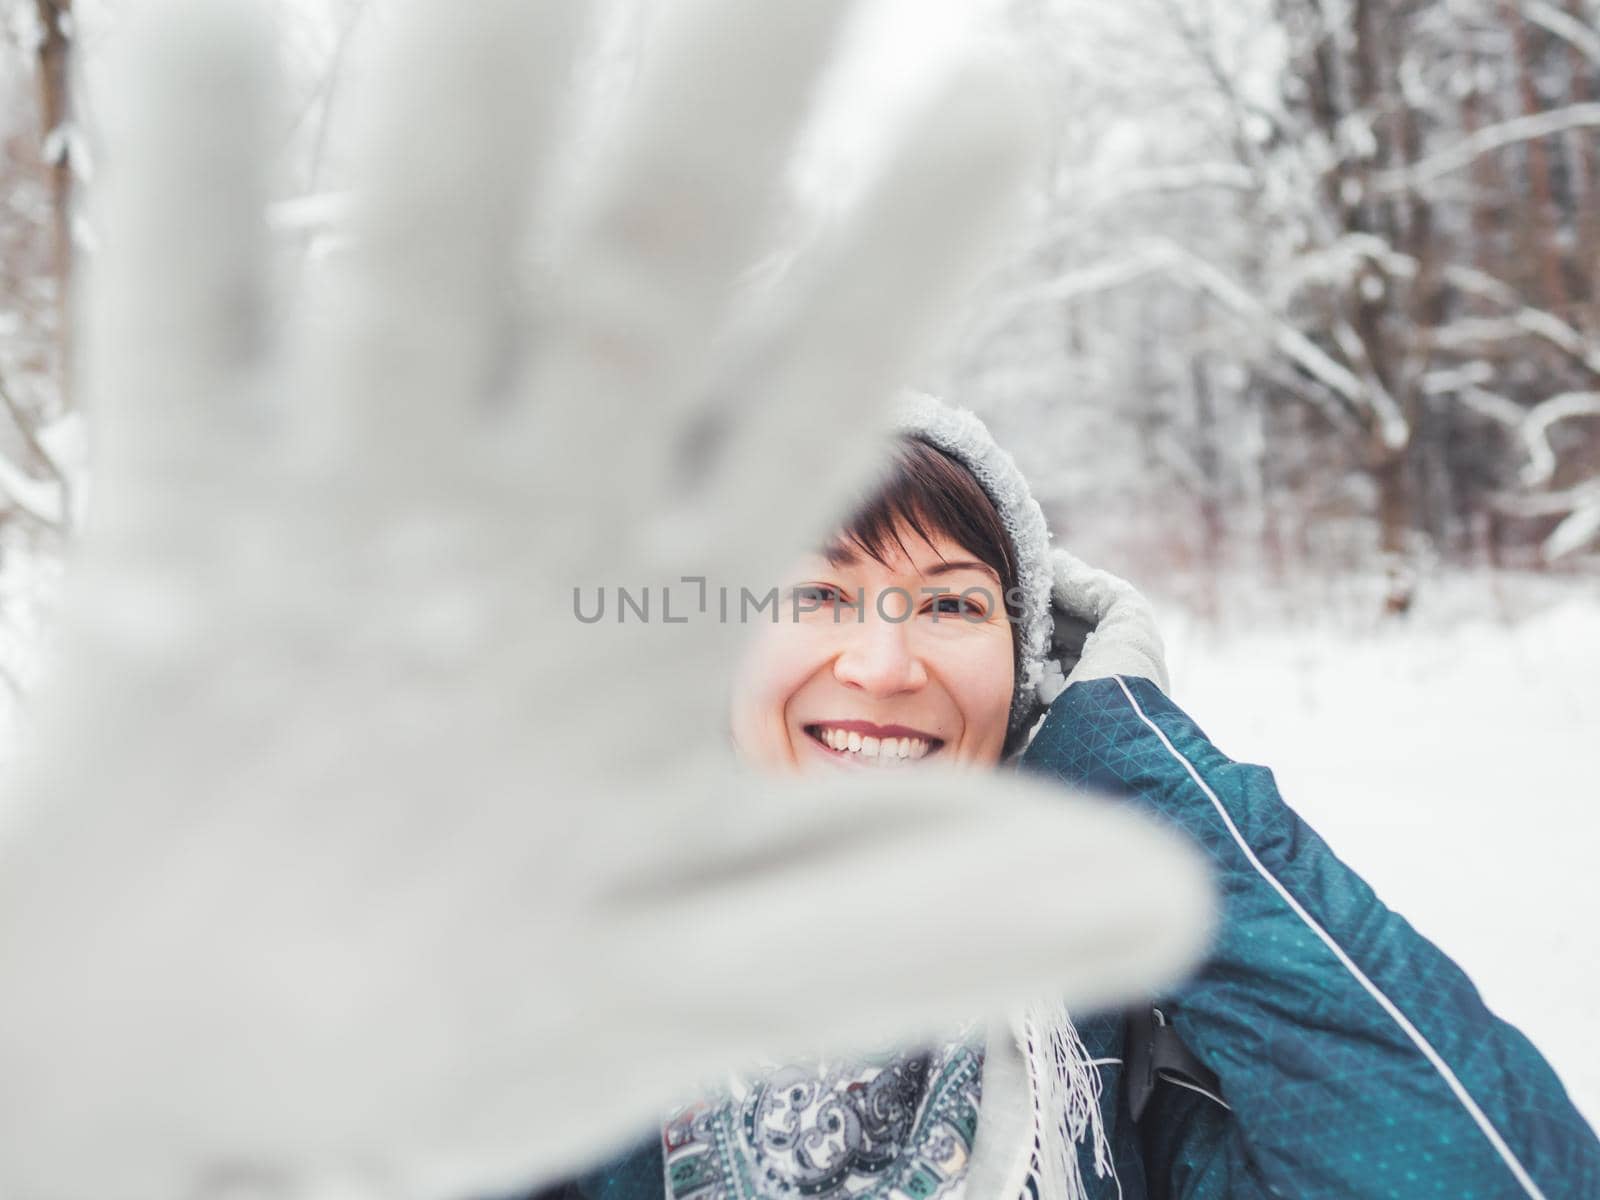 Smiling woman is closing camera with hand in warm glove. Fun in snowy winter forest. Woman laughs as she walks through wood. Sincere emotions.